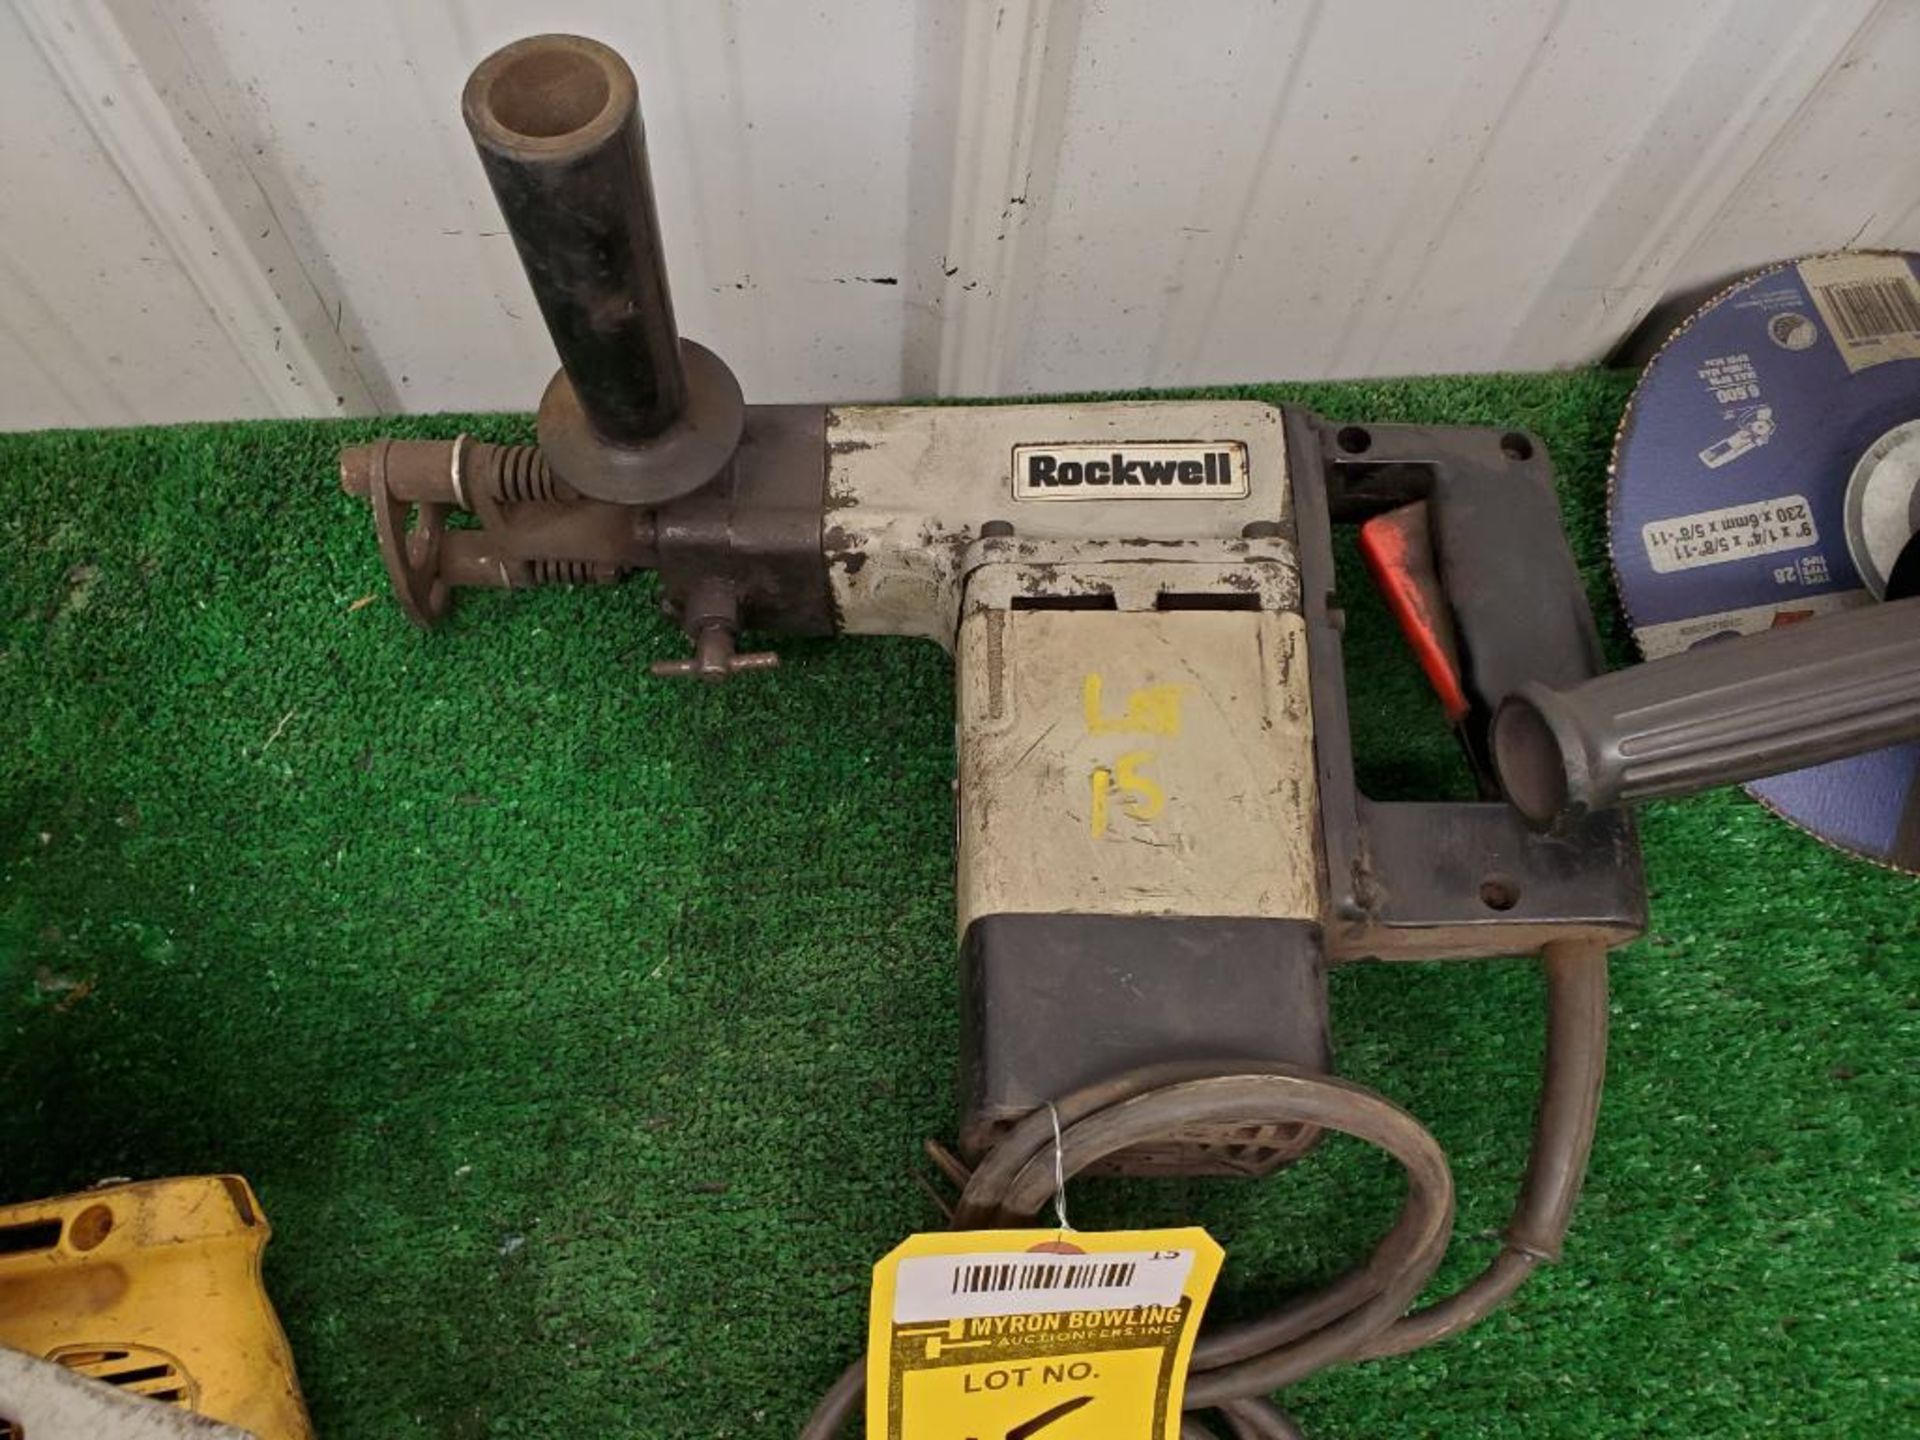 ROCKWELL 601 ELECTRIC ROTARY HAMMER DRILL